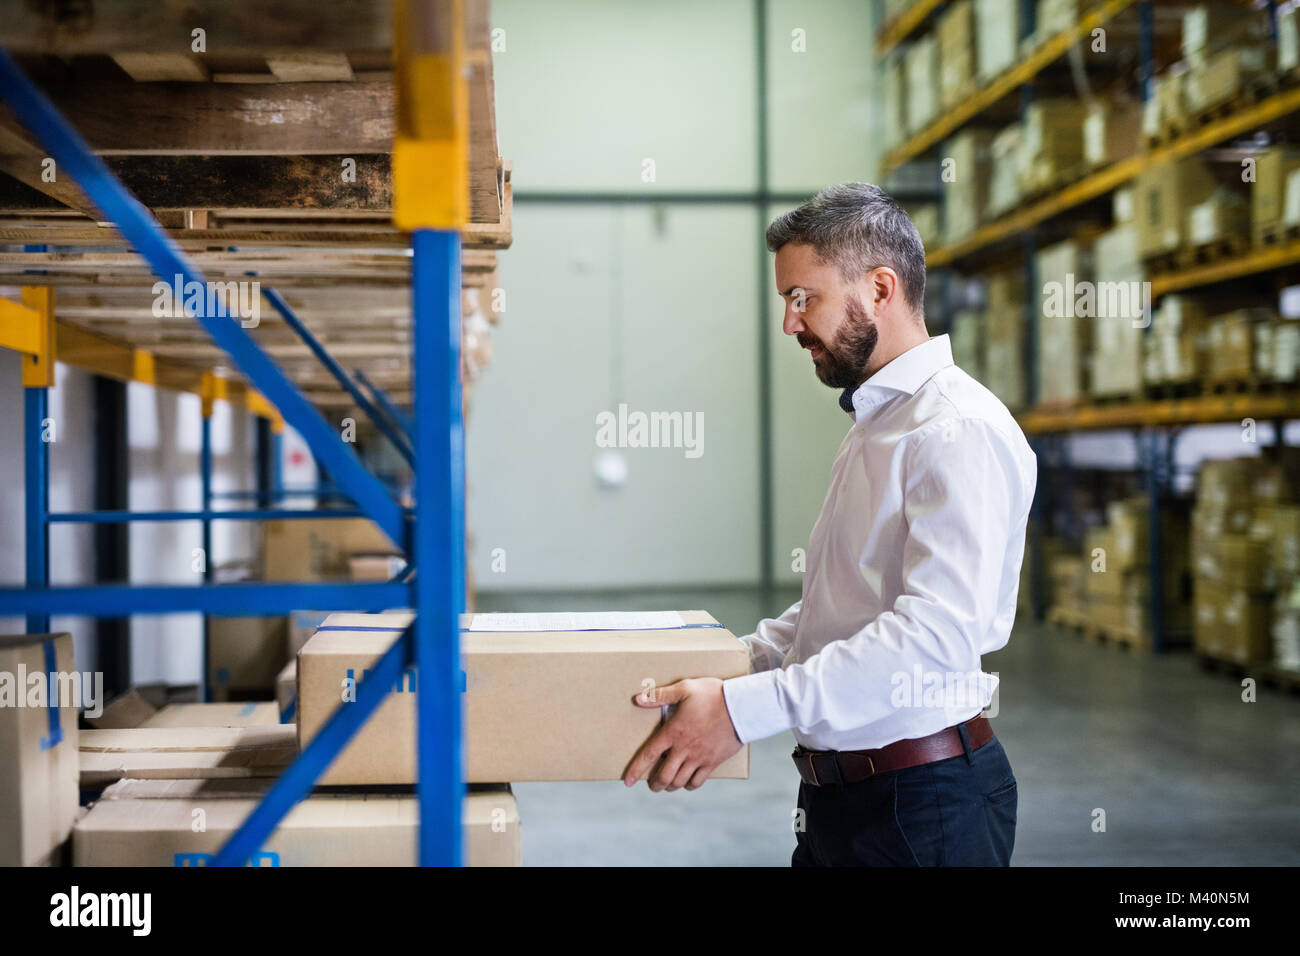 Male warehouse worker or supervisor. Stock Photo